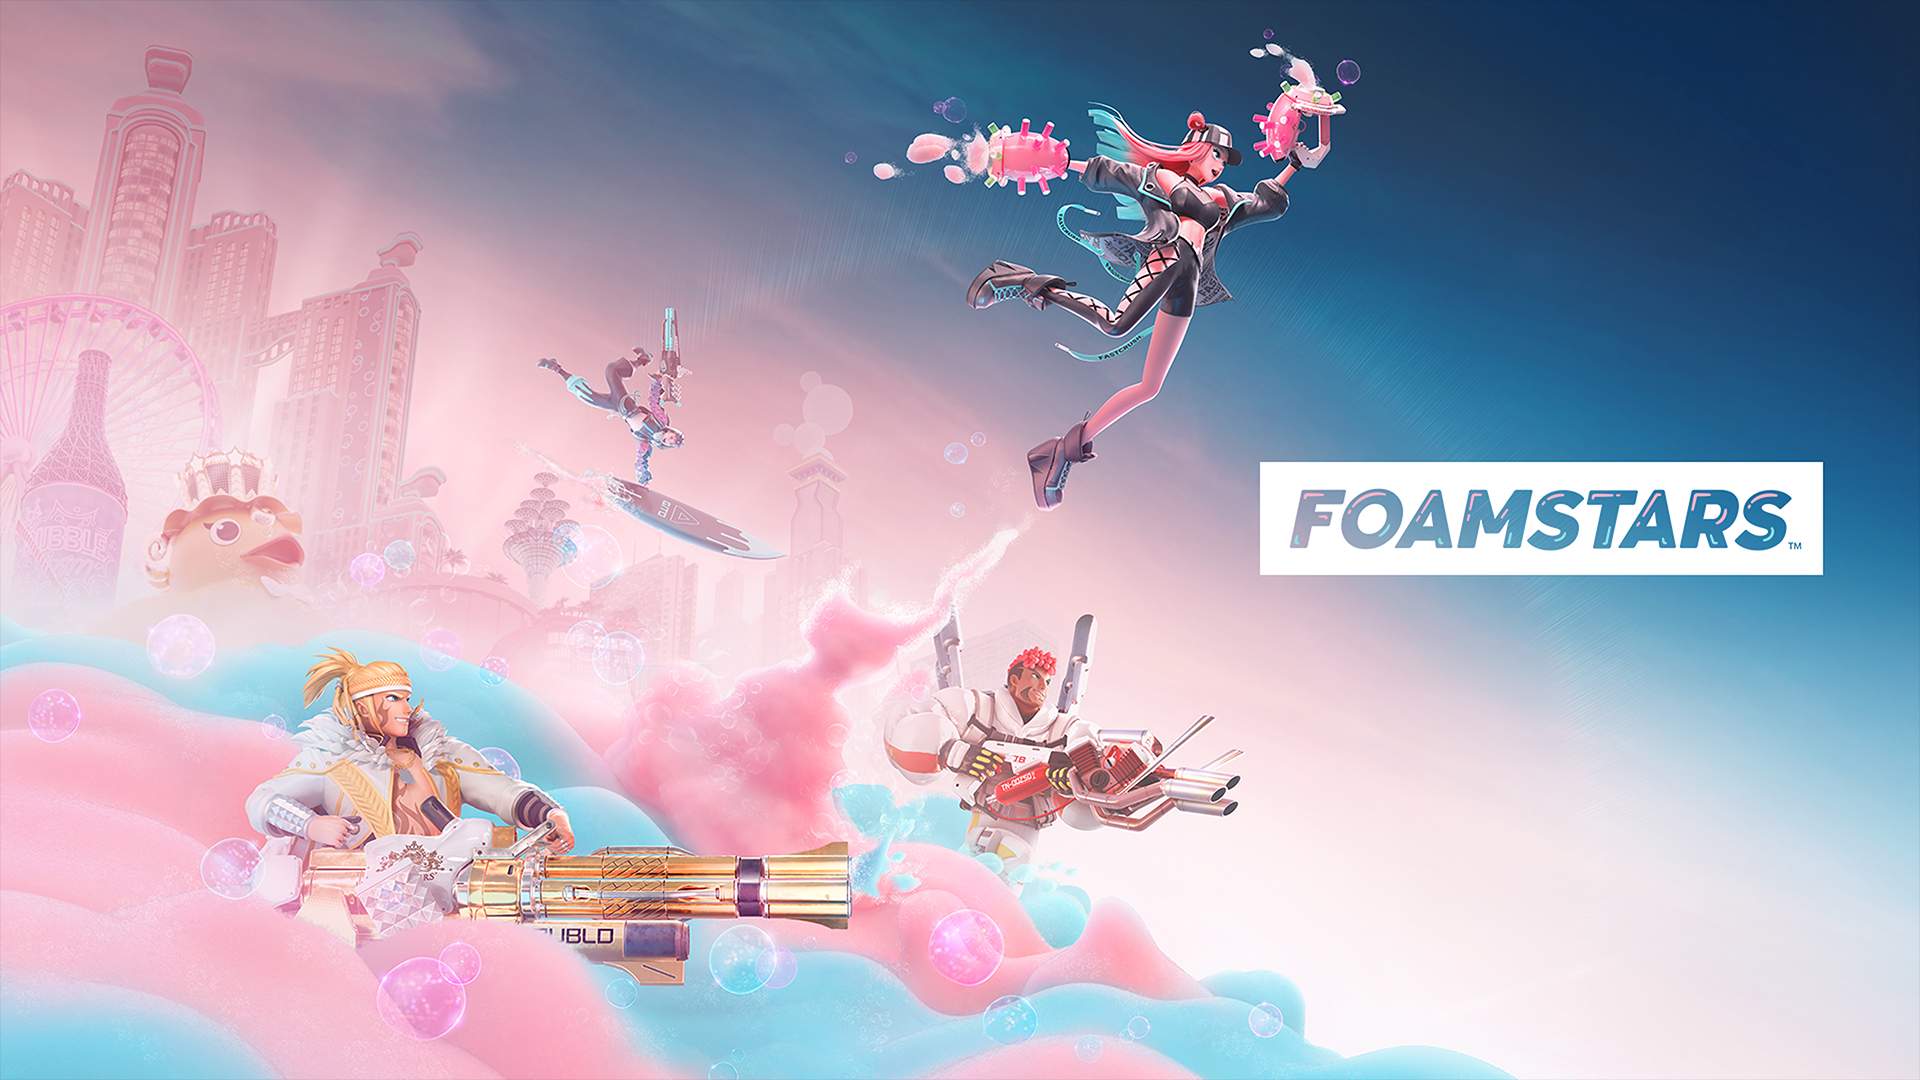 4 characters emerge from a sea of pink and blue foam with a cityscape behind with the FOAMSTARS logo